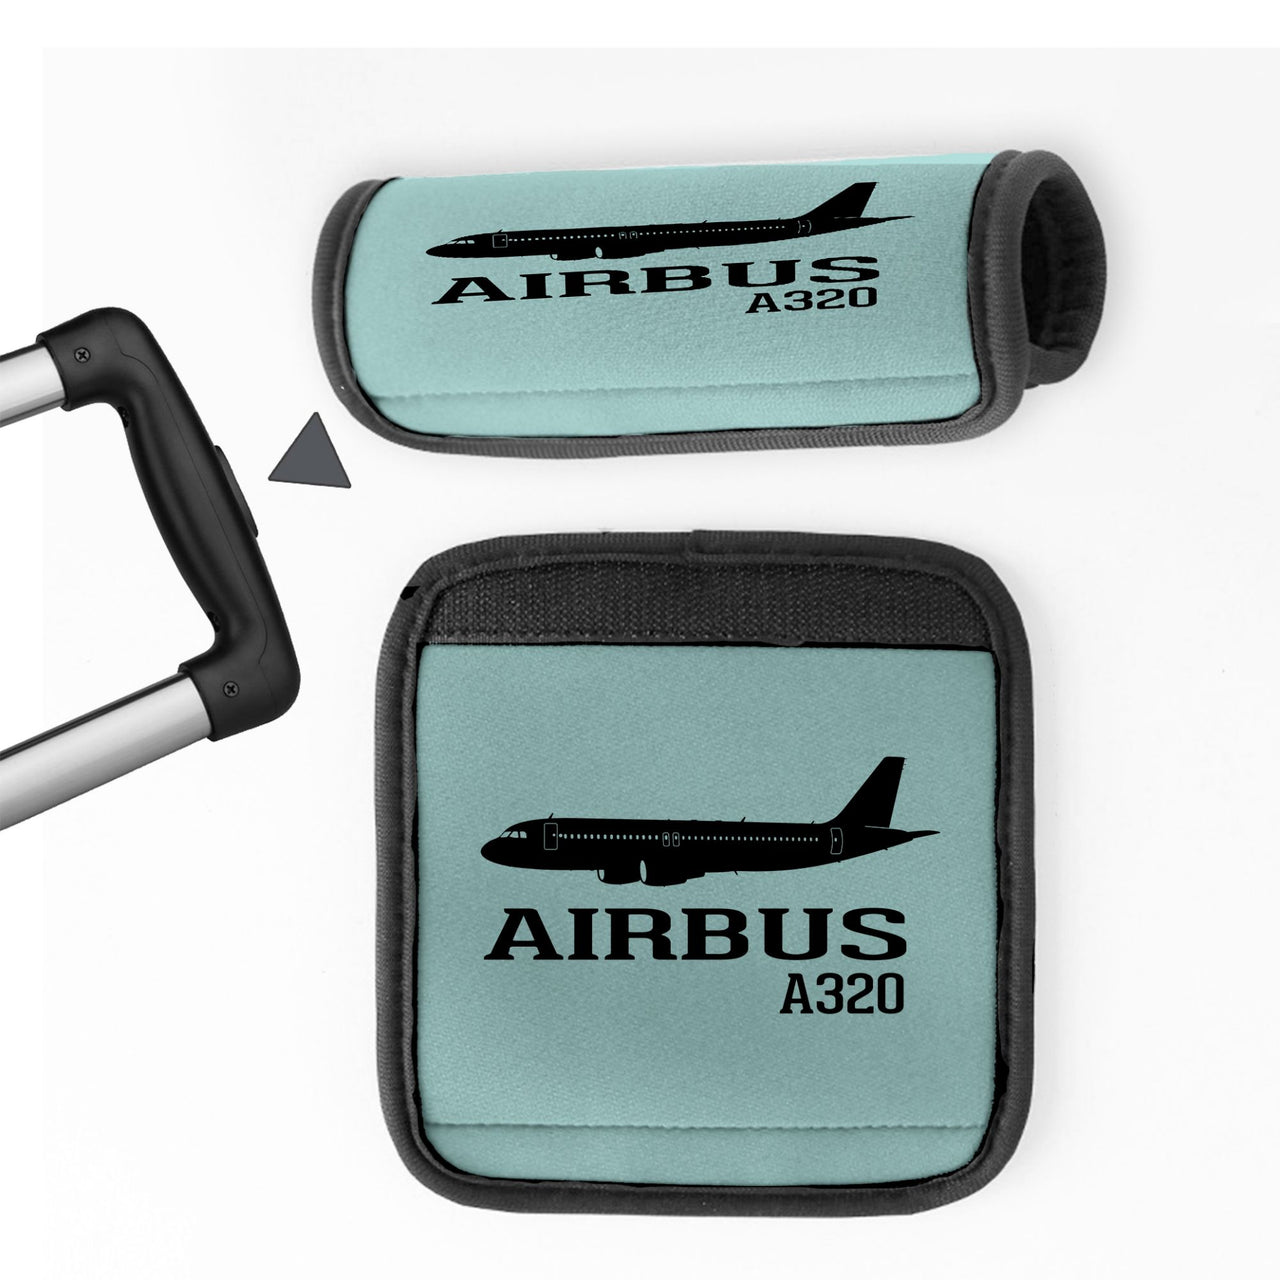 Airbus A320 Printed Designed Neoprene Luggage Handle Covers